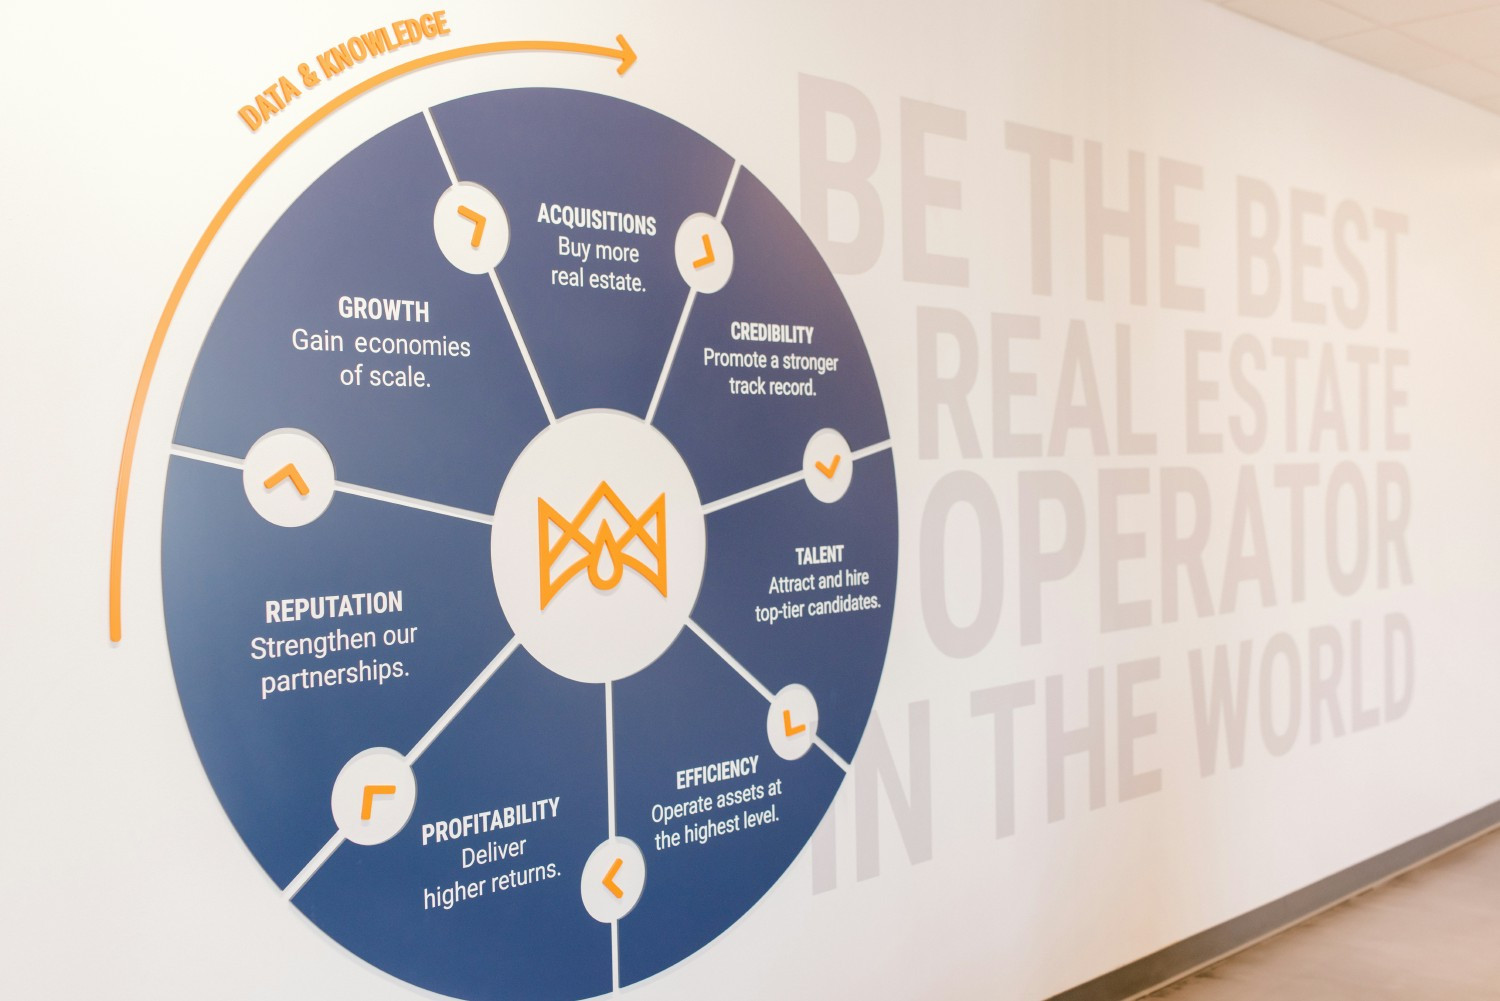 The Flywheel is at the center of all decision-making and keeps our team hyper-focused on the most impactful work.